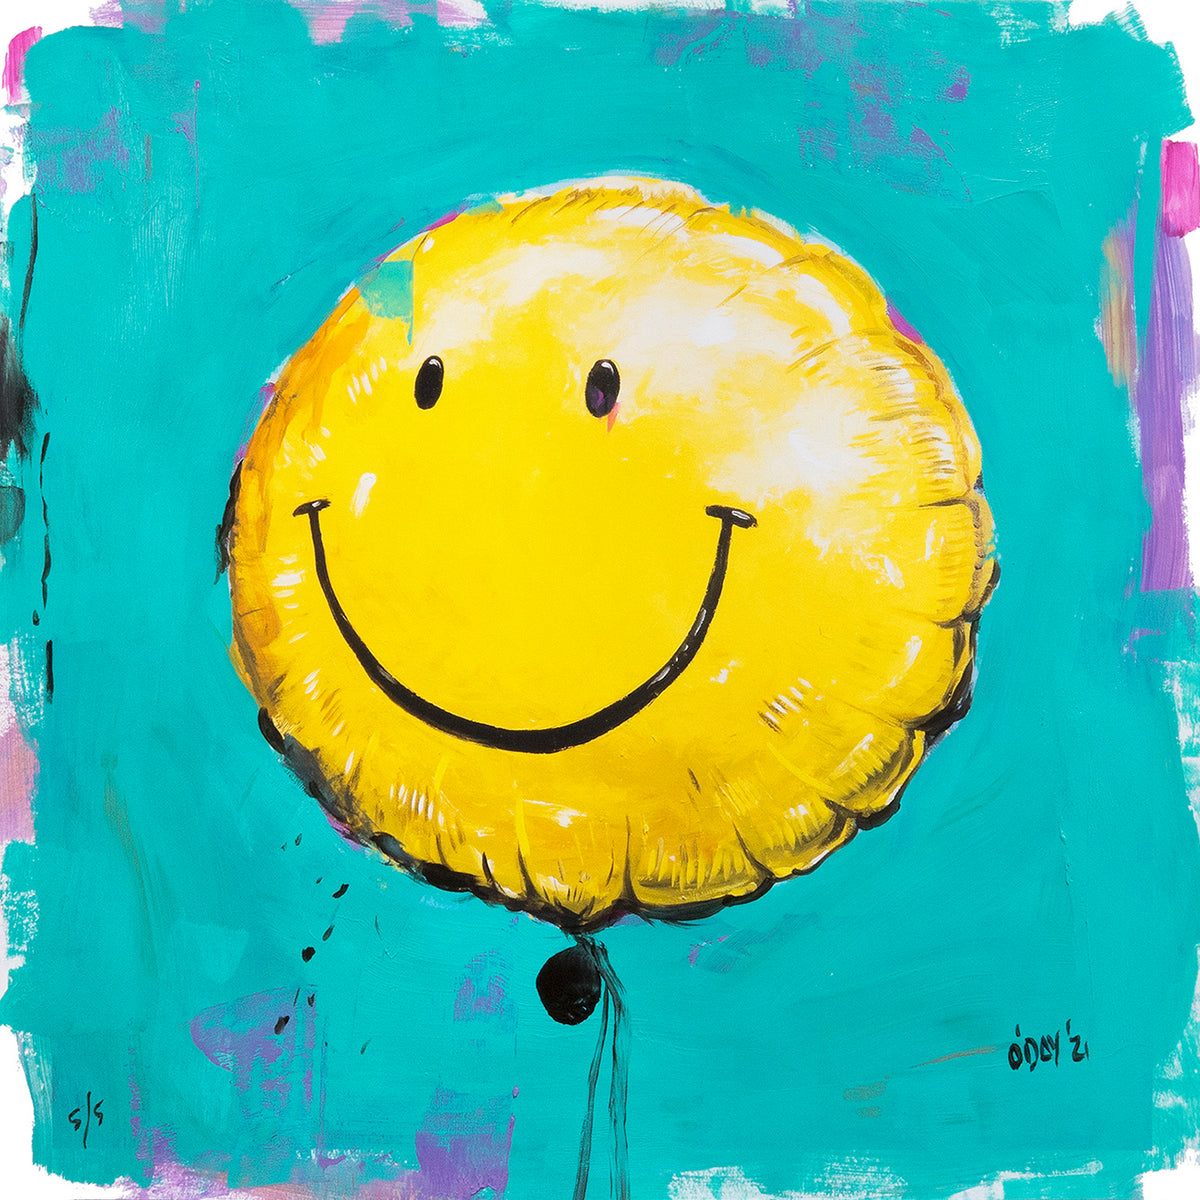 Adam J. O&#39;Day &quot;Smiley Face Balloon: Teal&quot; - Unique Hand-Painted Print - 24 x 24&quot;